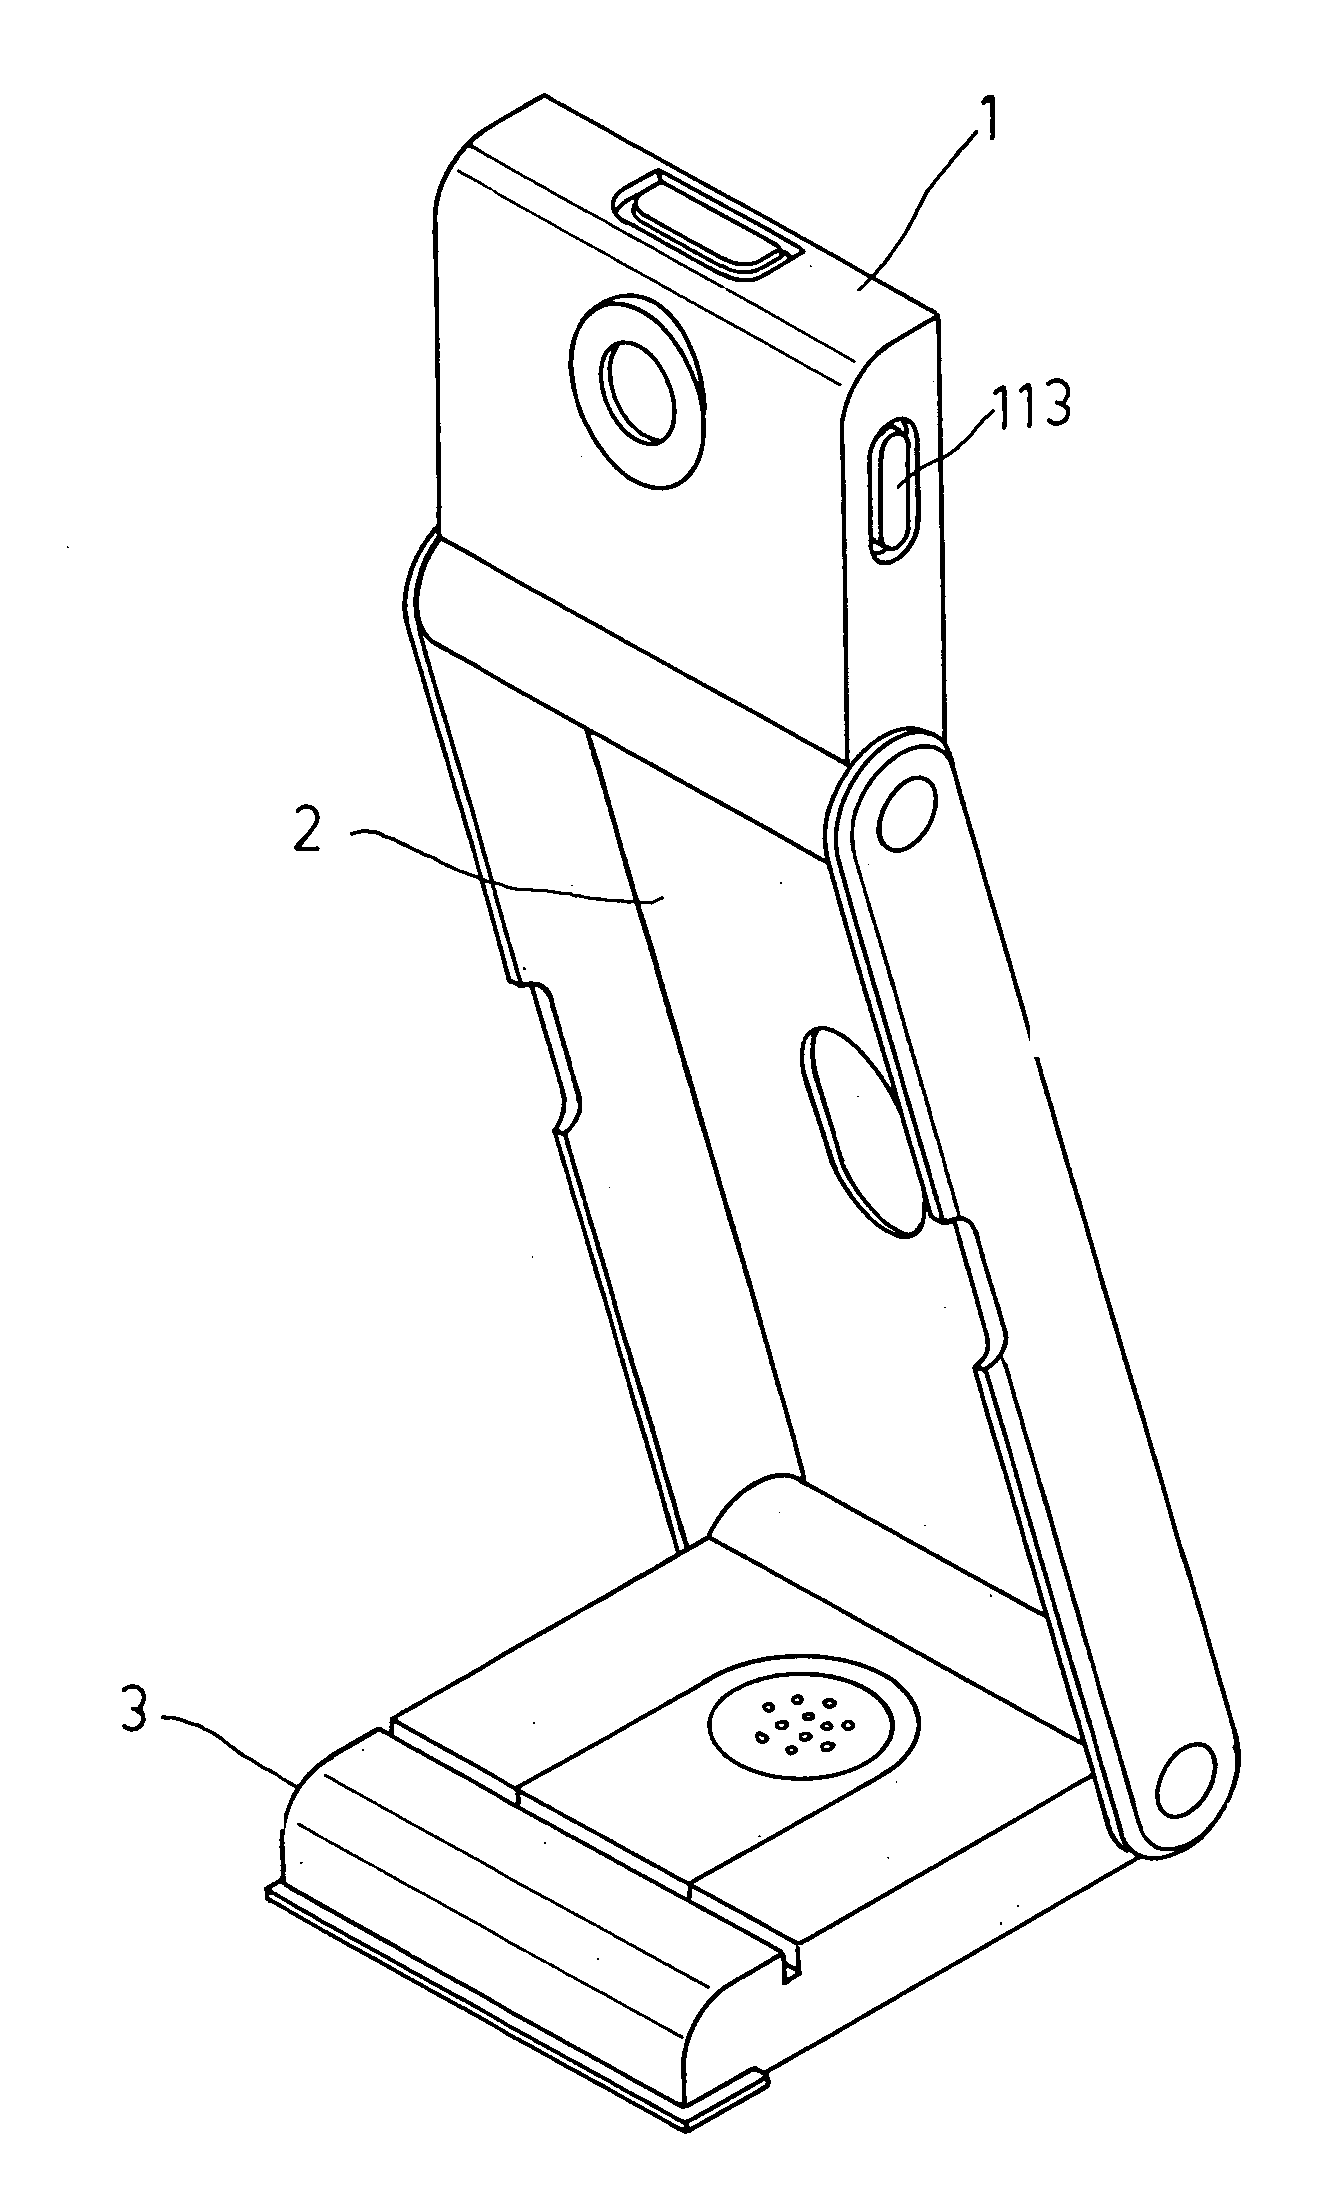 Foldable picture-taking device with scanning function